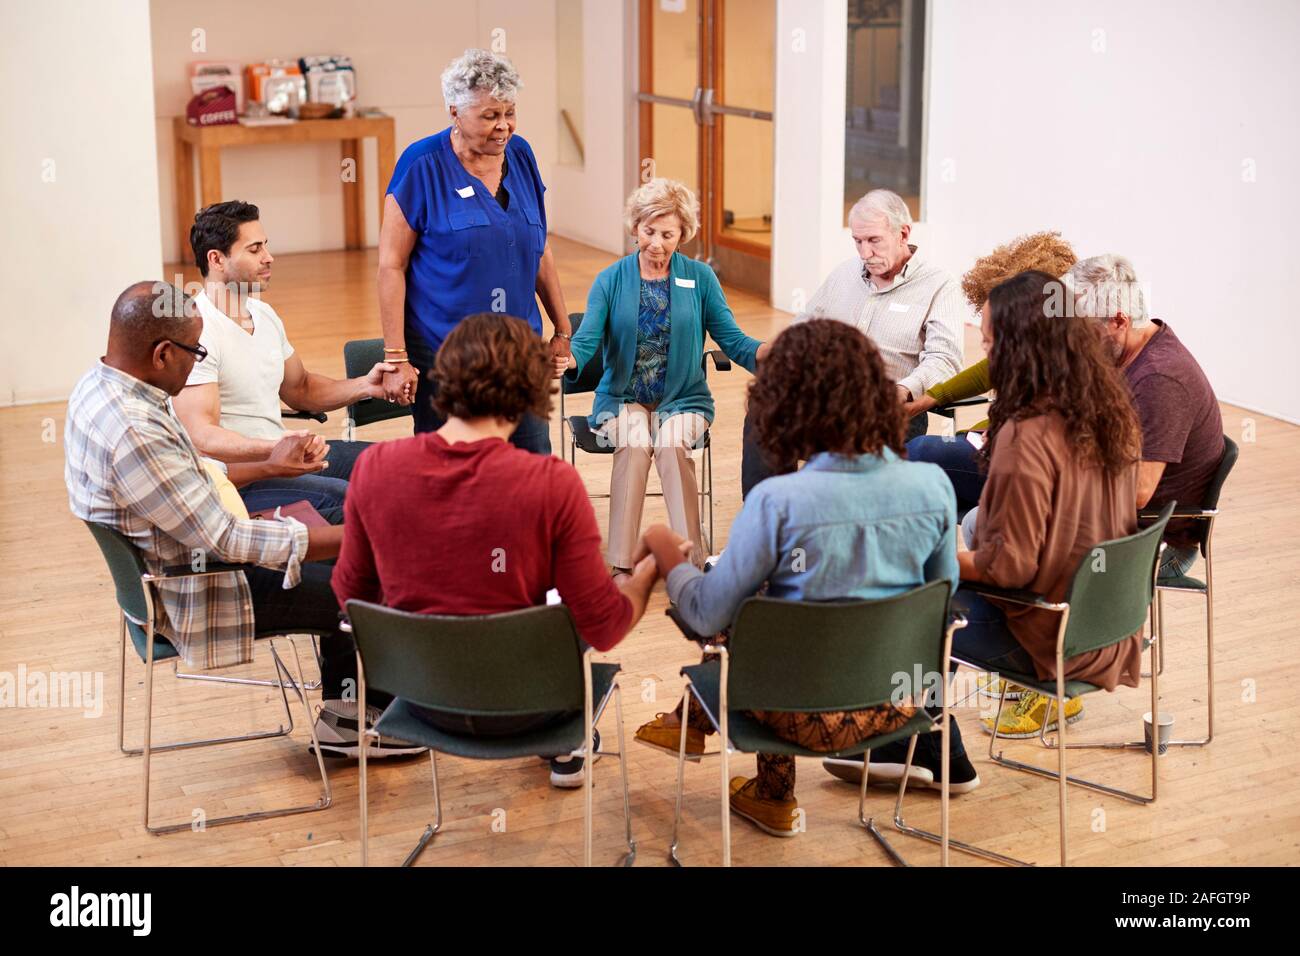 People Holding Hands And Praying At Bible Study Group Meeting In Community Center Stock Photo